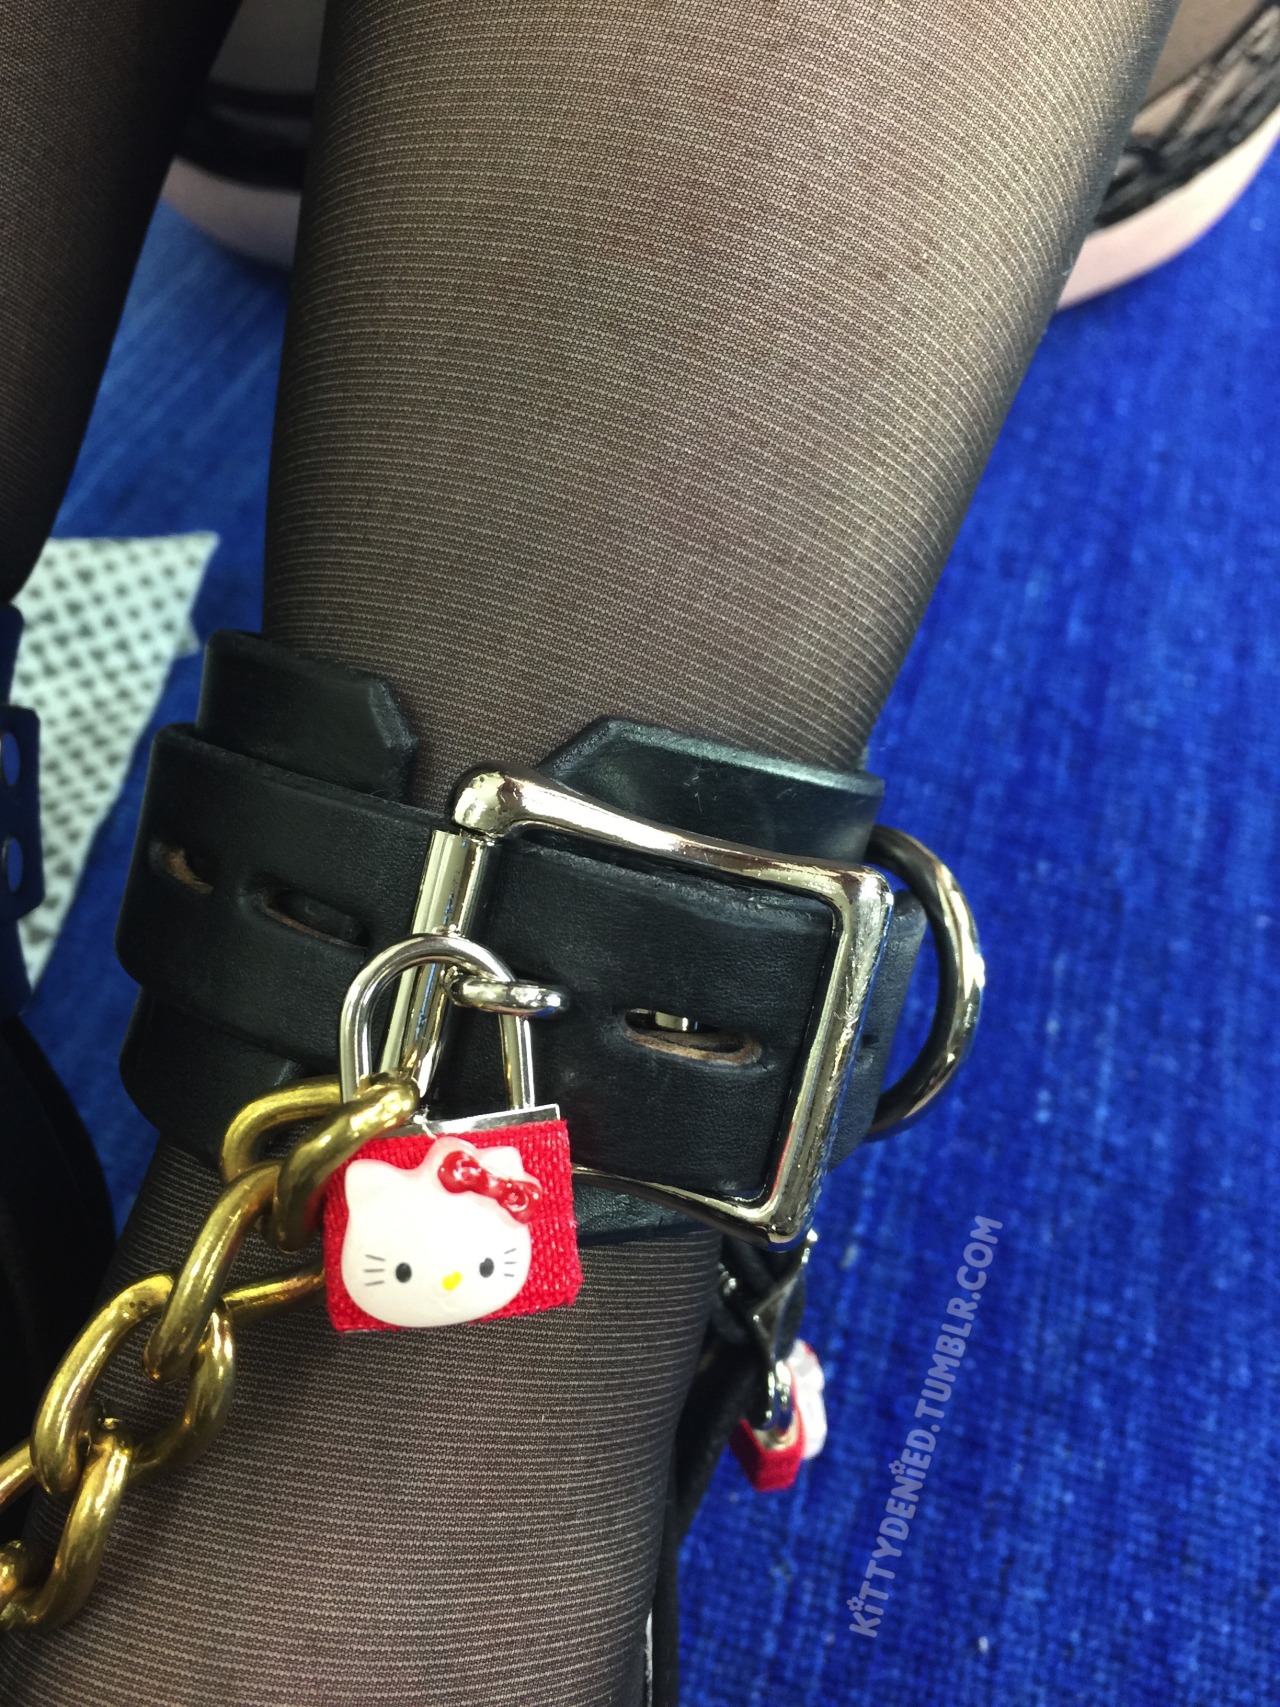 kittydenied:  Showing off some Hello Kitty lock covers courtesy of lockedlali. Thank